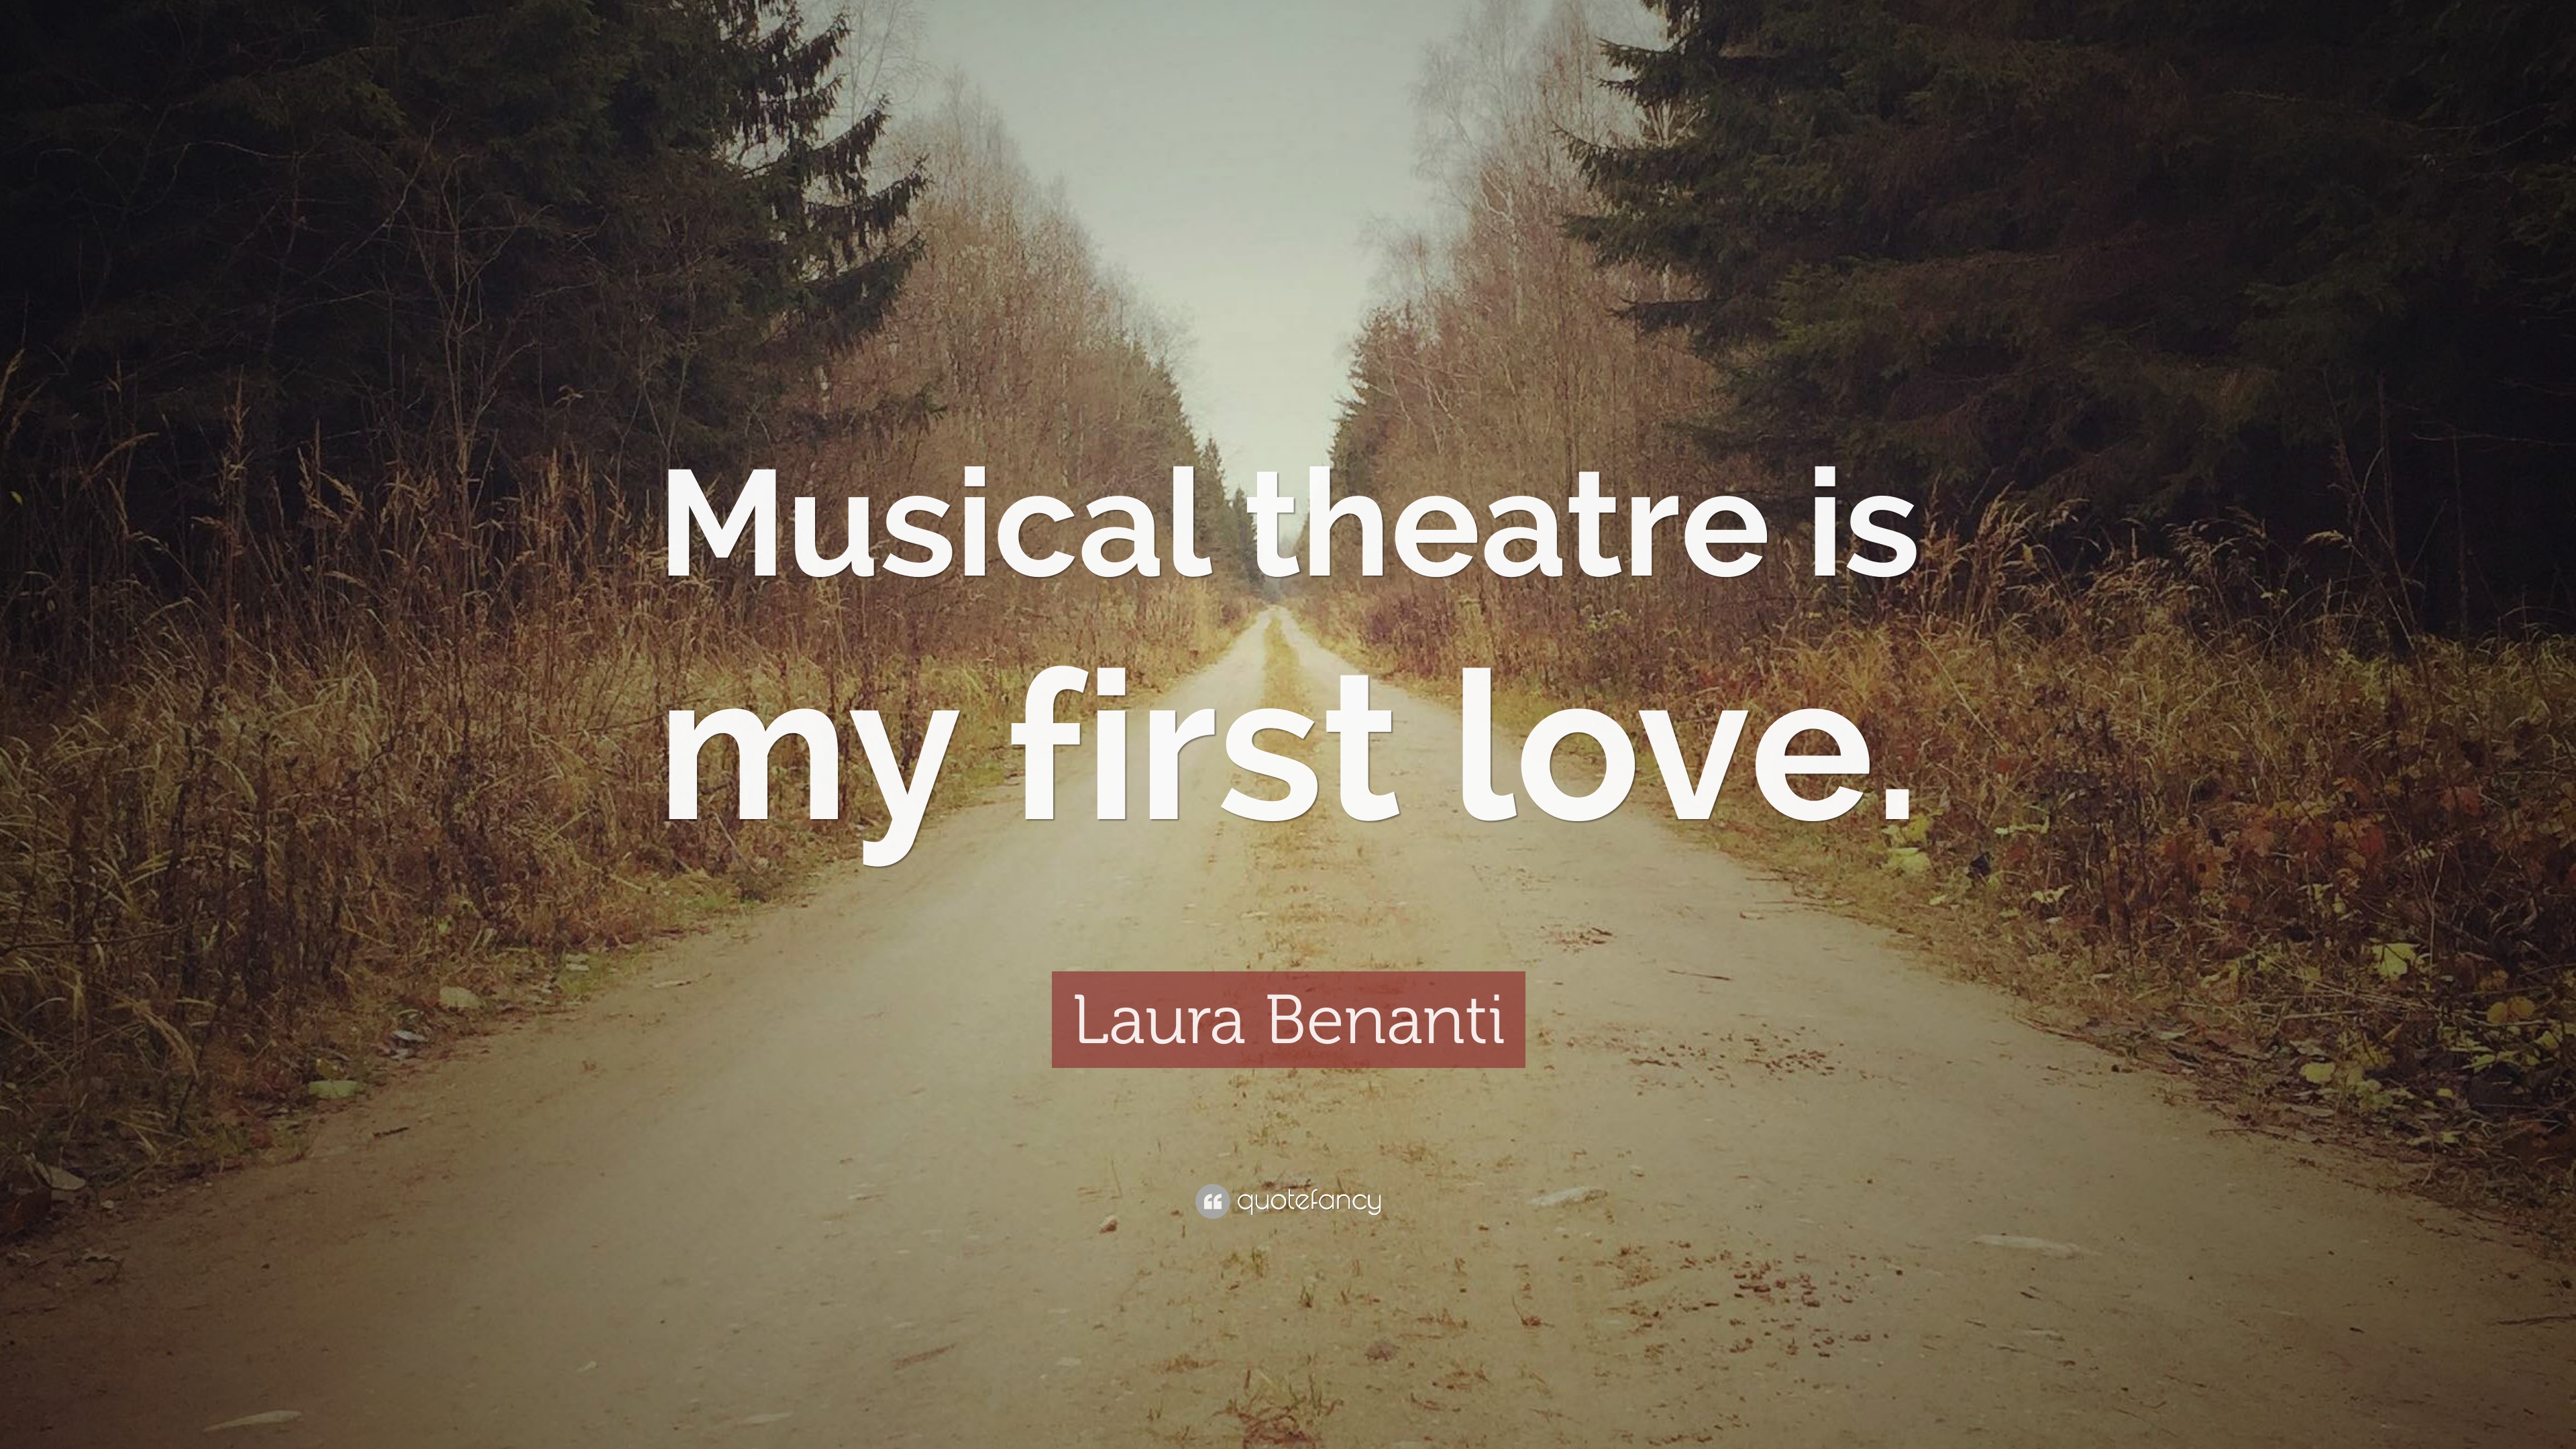 Laura Benanti Quote: “Musical theatre is my first love.” 7